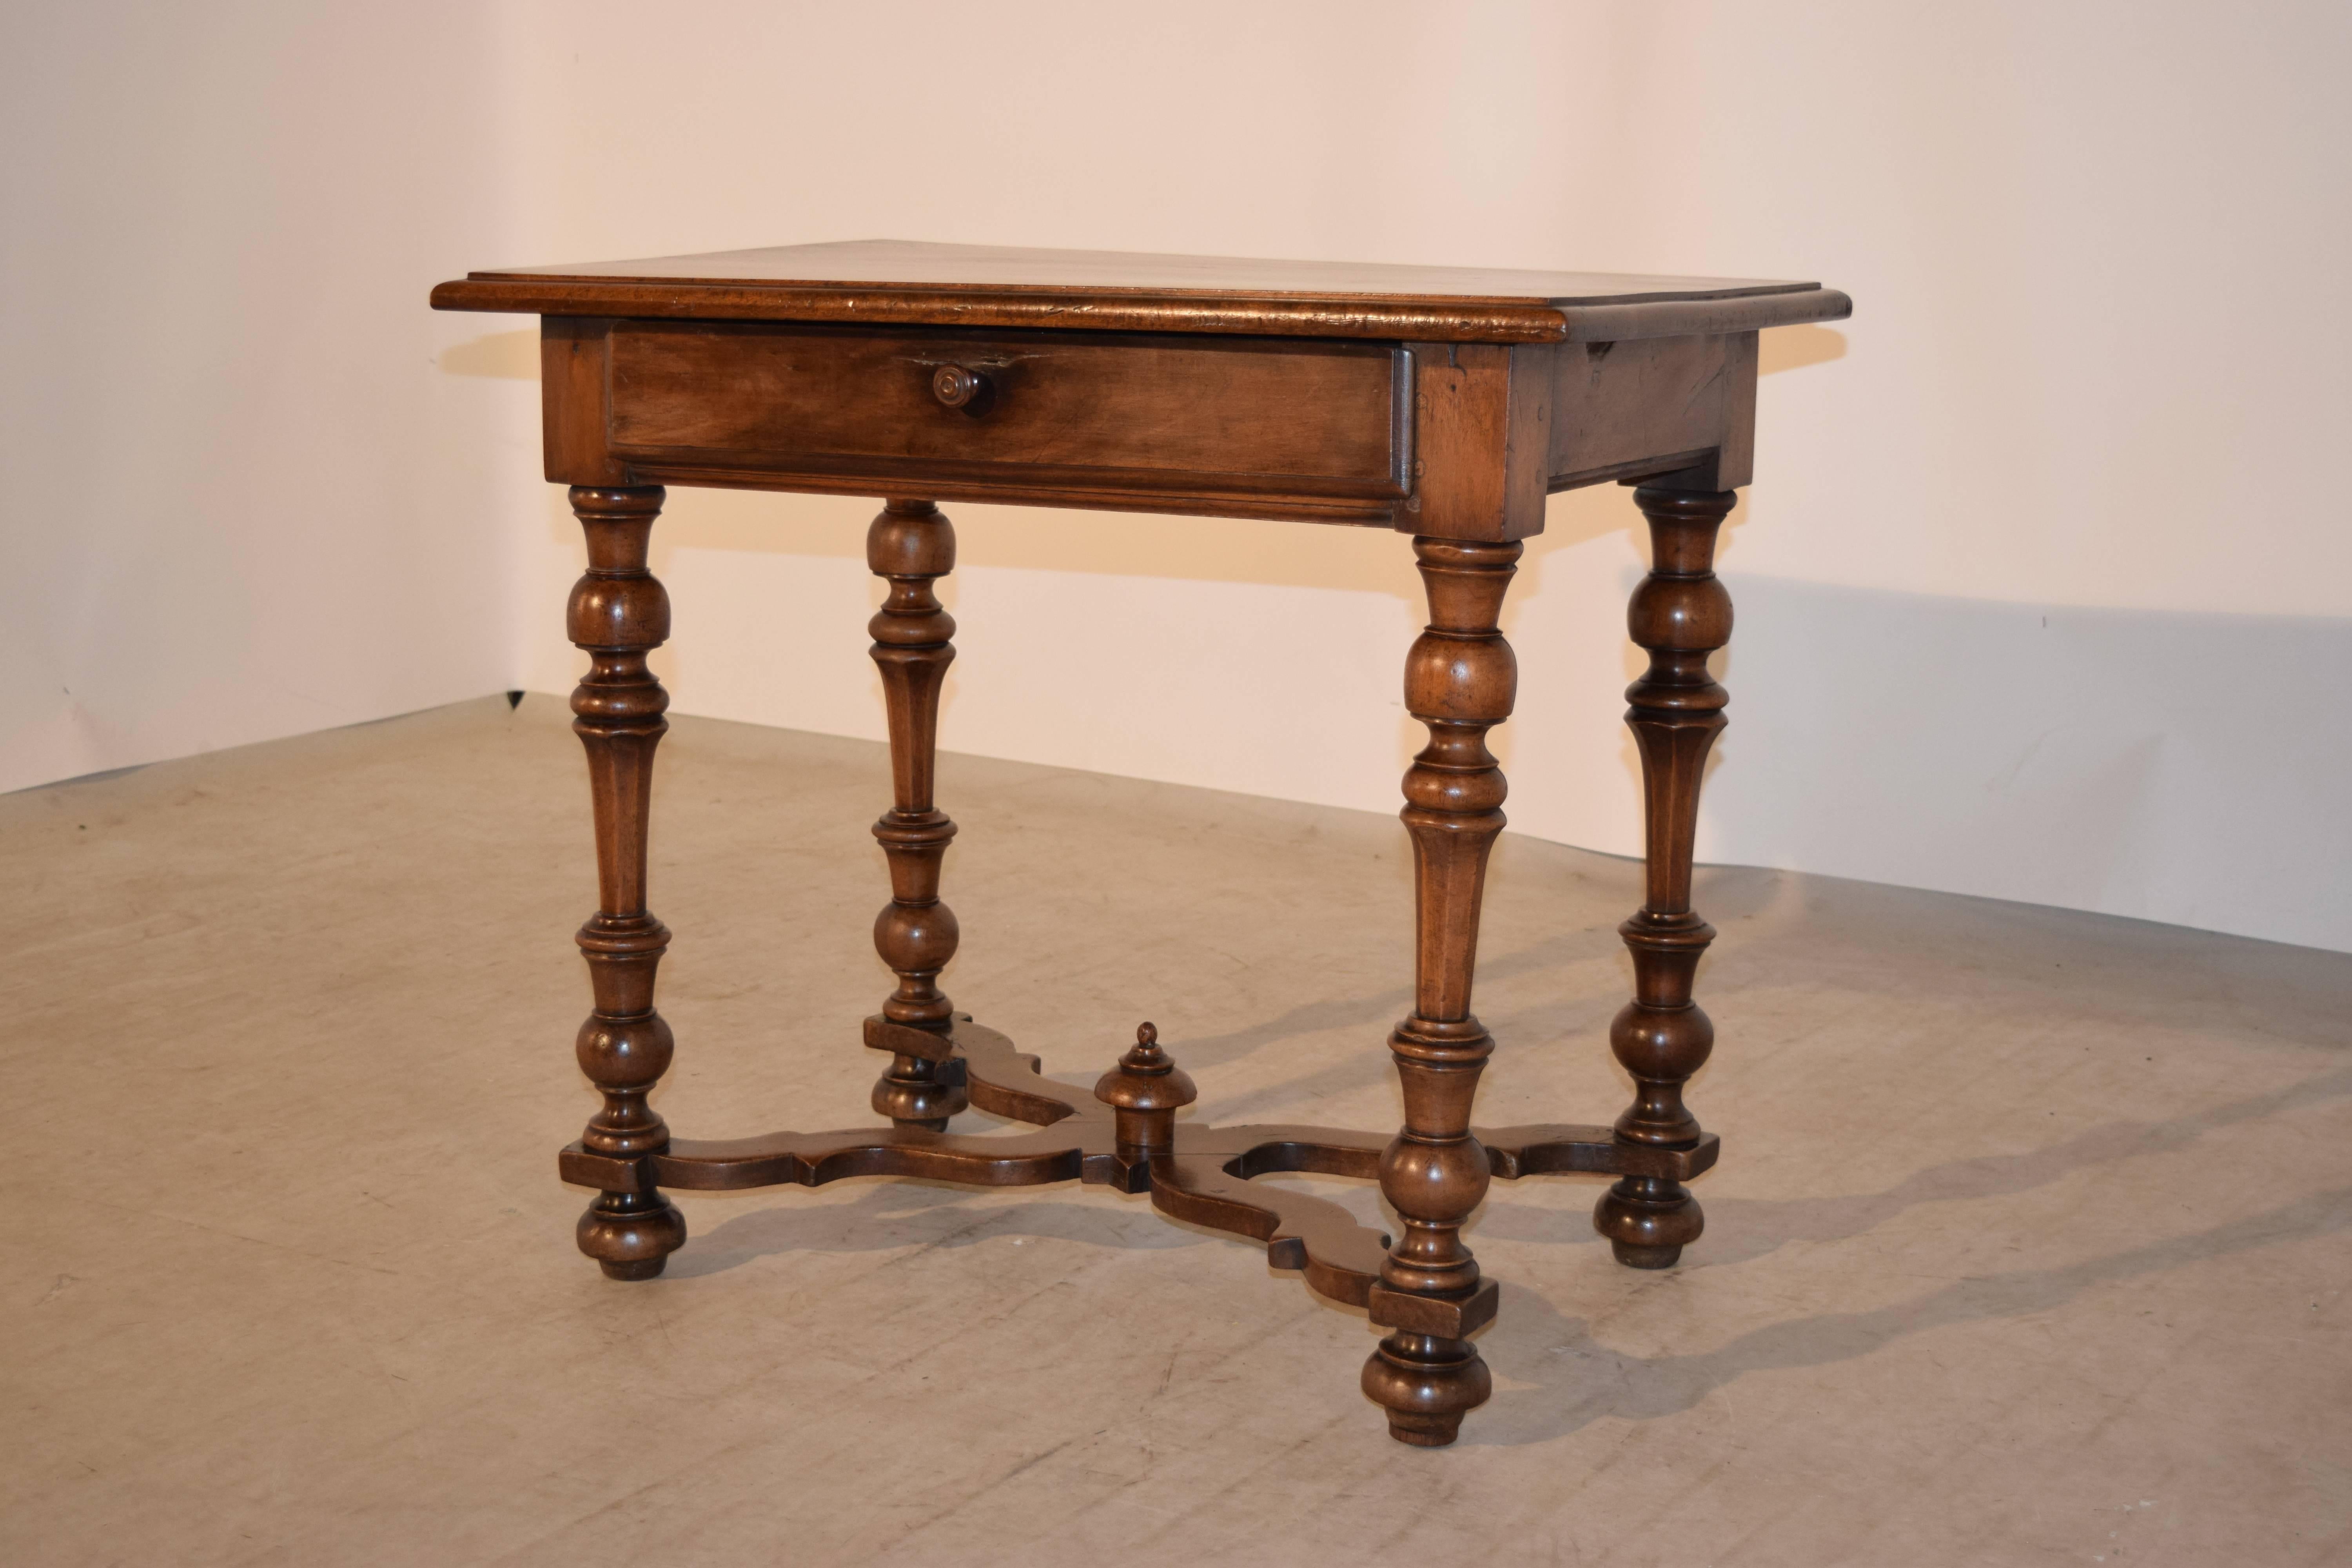 19th century walnut side table from France. The top is beveled around the edge and follows down to a simple apron containing a single drawer, supported on hand turned legs which are joined by serpentine shaped cross stretchers, decorated with a